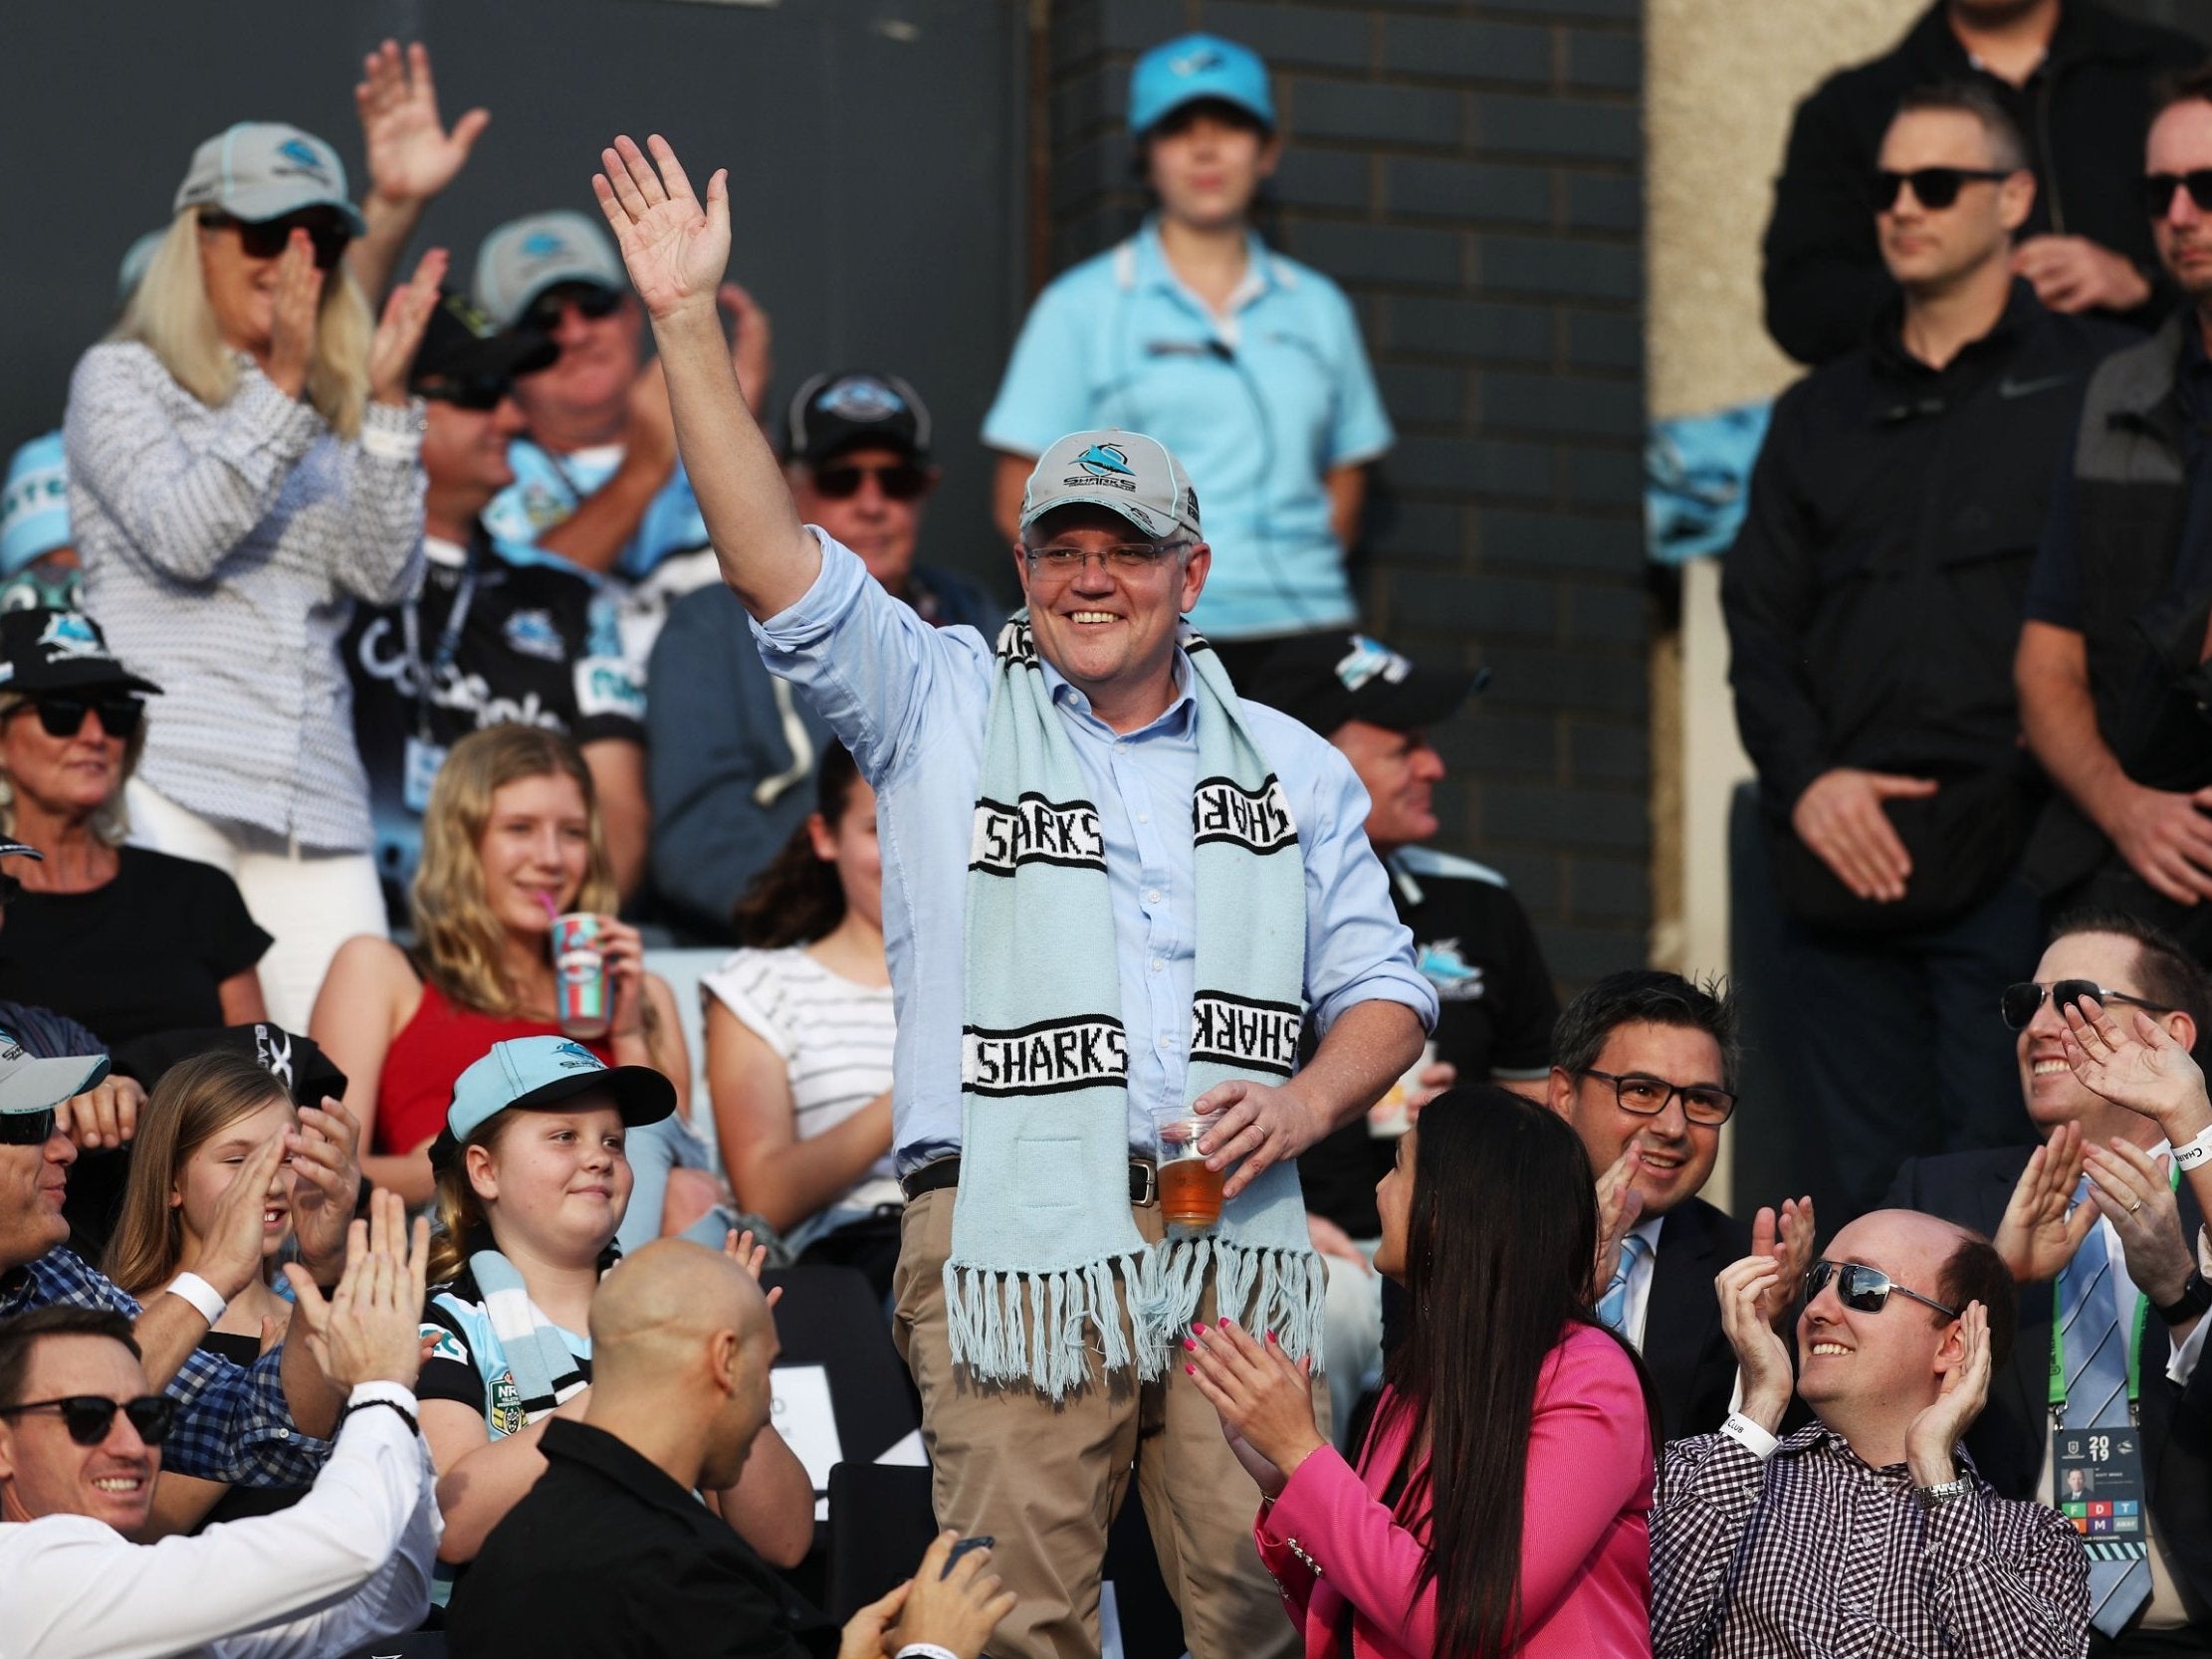 Prime minister of Australia Scott Morrison waves to the crowd during Cronulla Sharks match in Sydney on 19 May 2019.